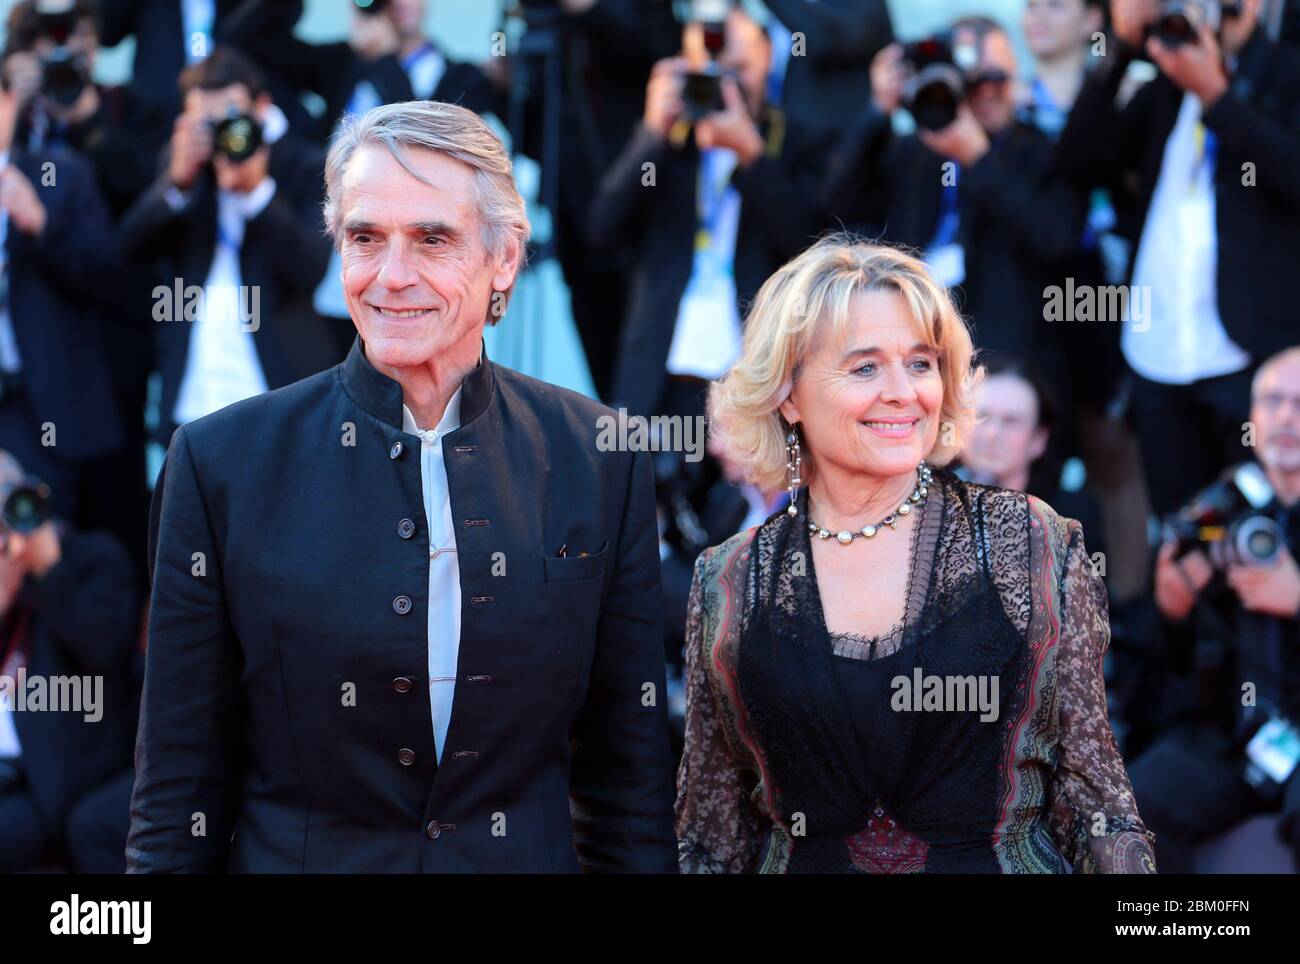 VENICE, ITALY - AUGUST 31: Sinead Cusack and Jeremy Irons  attends the premiere of 'La La Land' during the 73rd Venice Film Festival August 31, 2016 Stock Photo